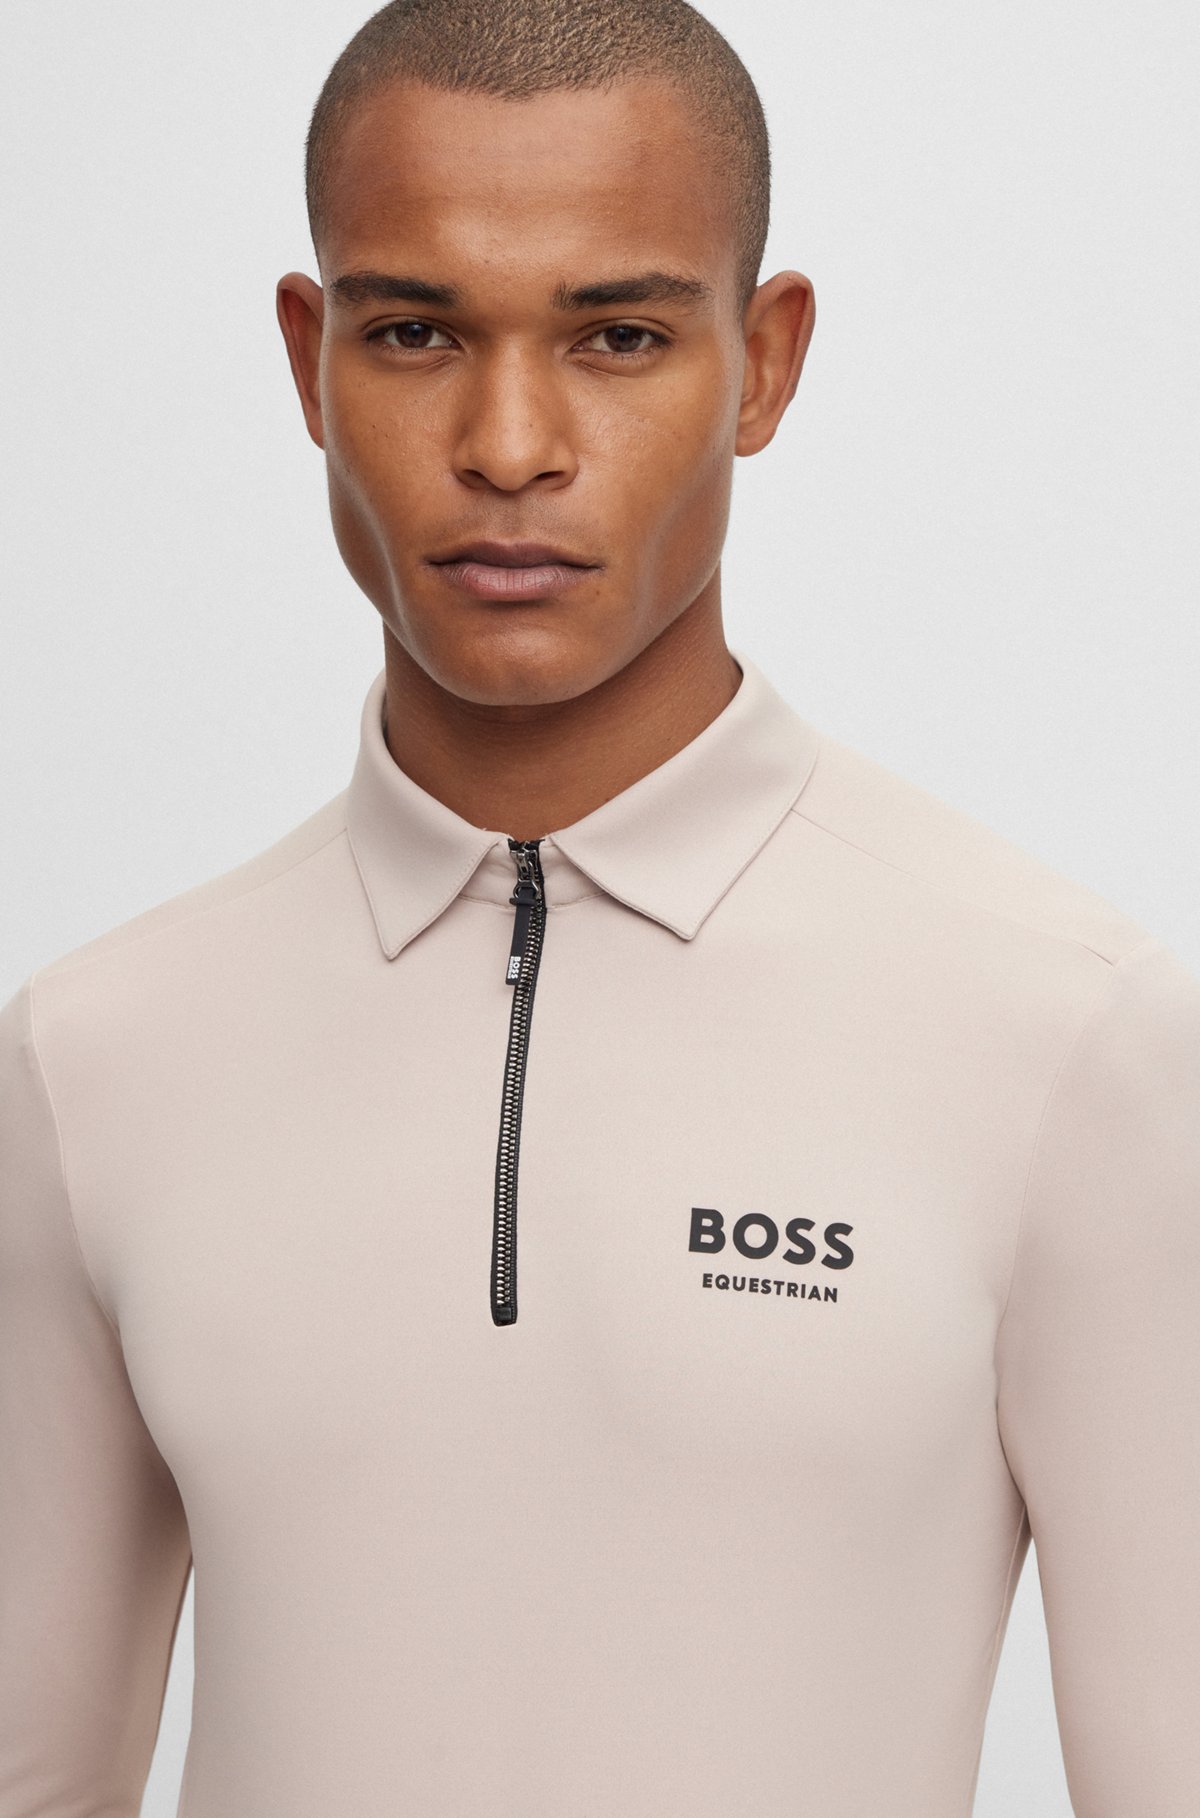 BOSS - Equestrian training polo shirt in power-stretch material